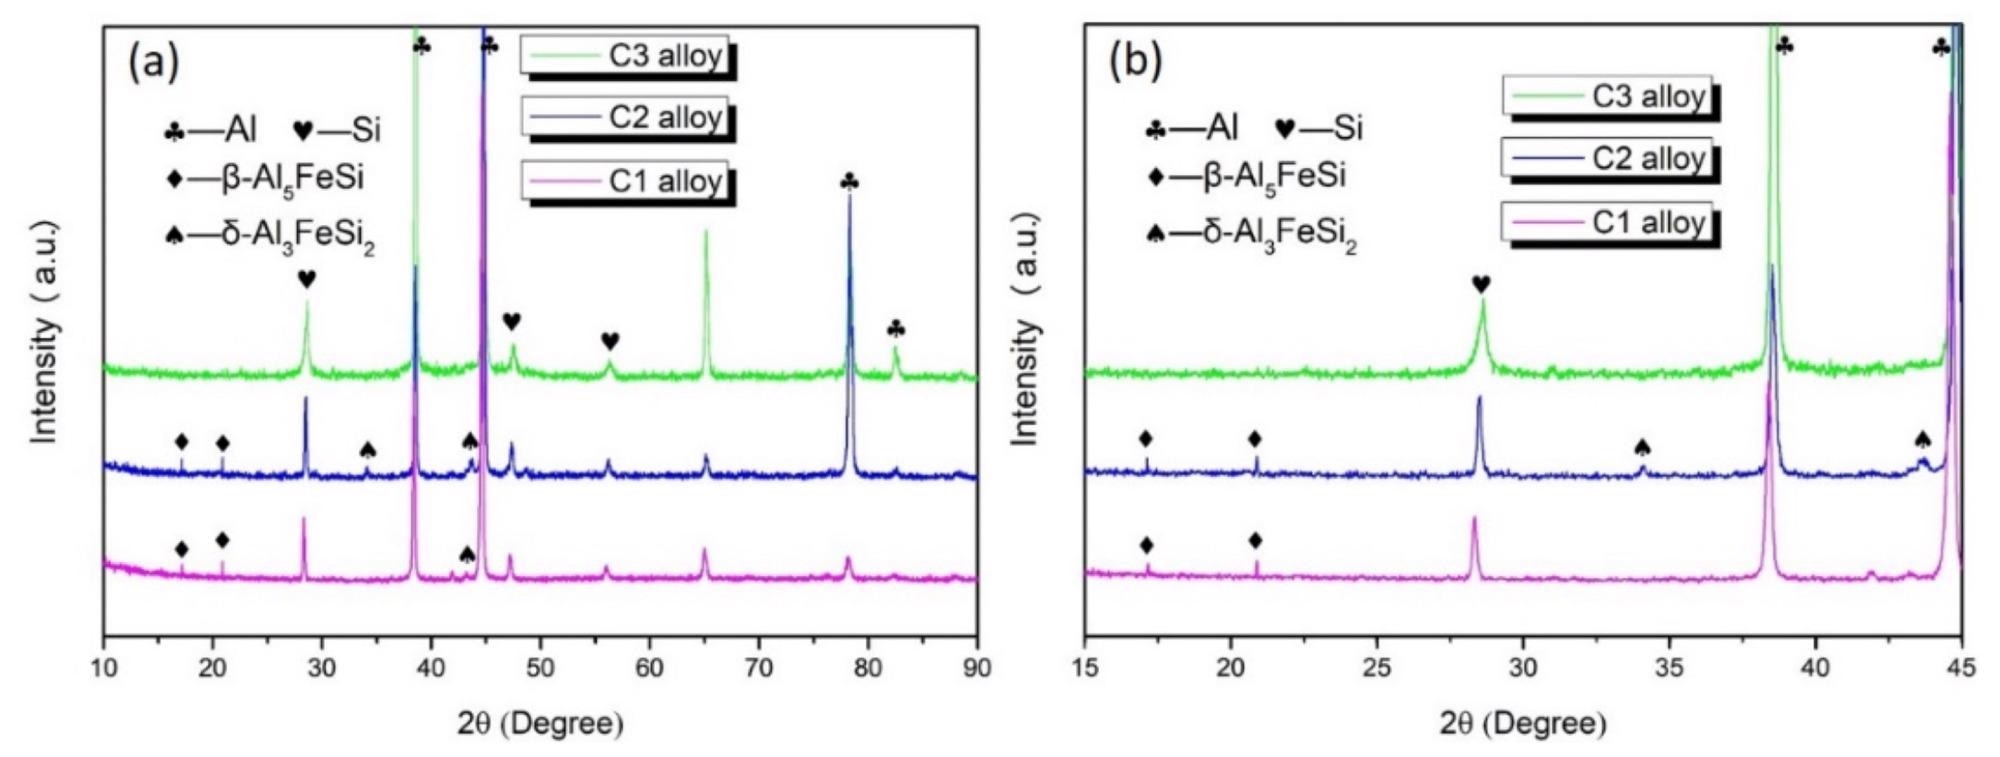 (a) XRD spectra of the C1, C2, and C3 alloys. (b) Shows the partially amplified spectra of (a).